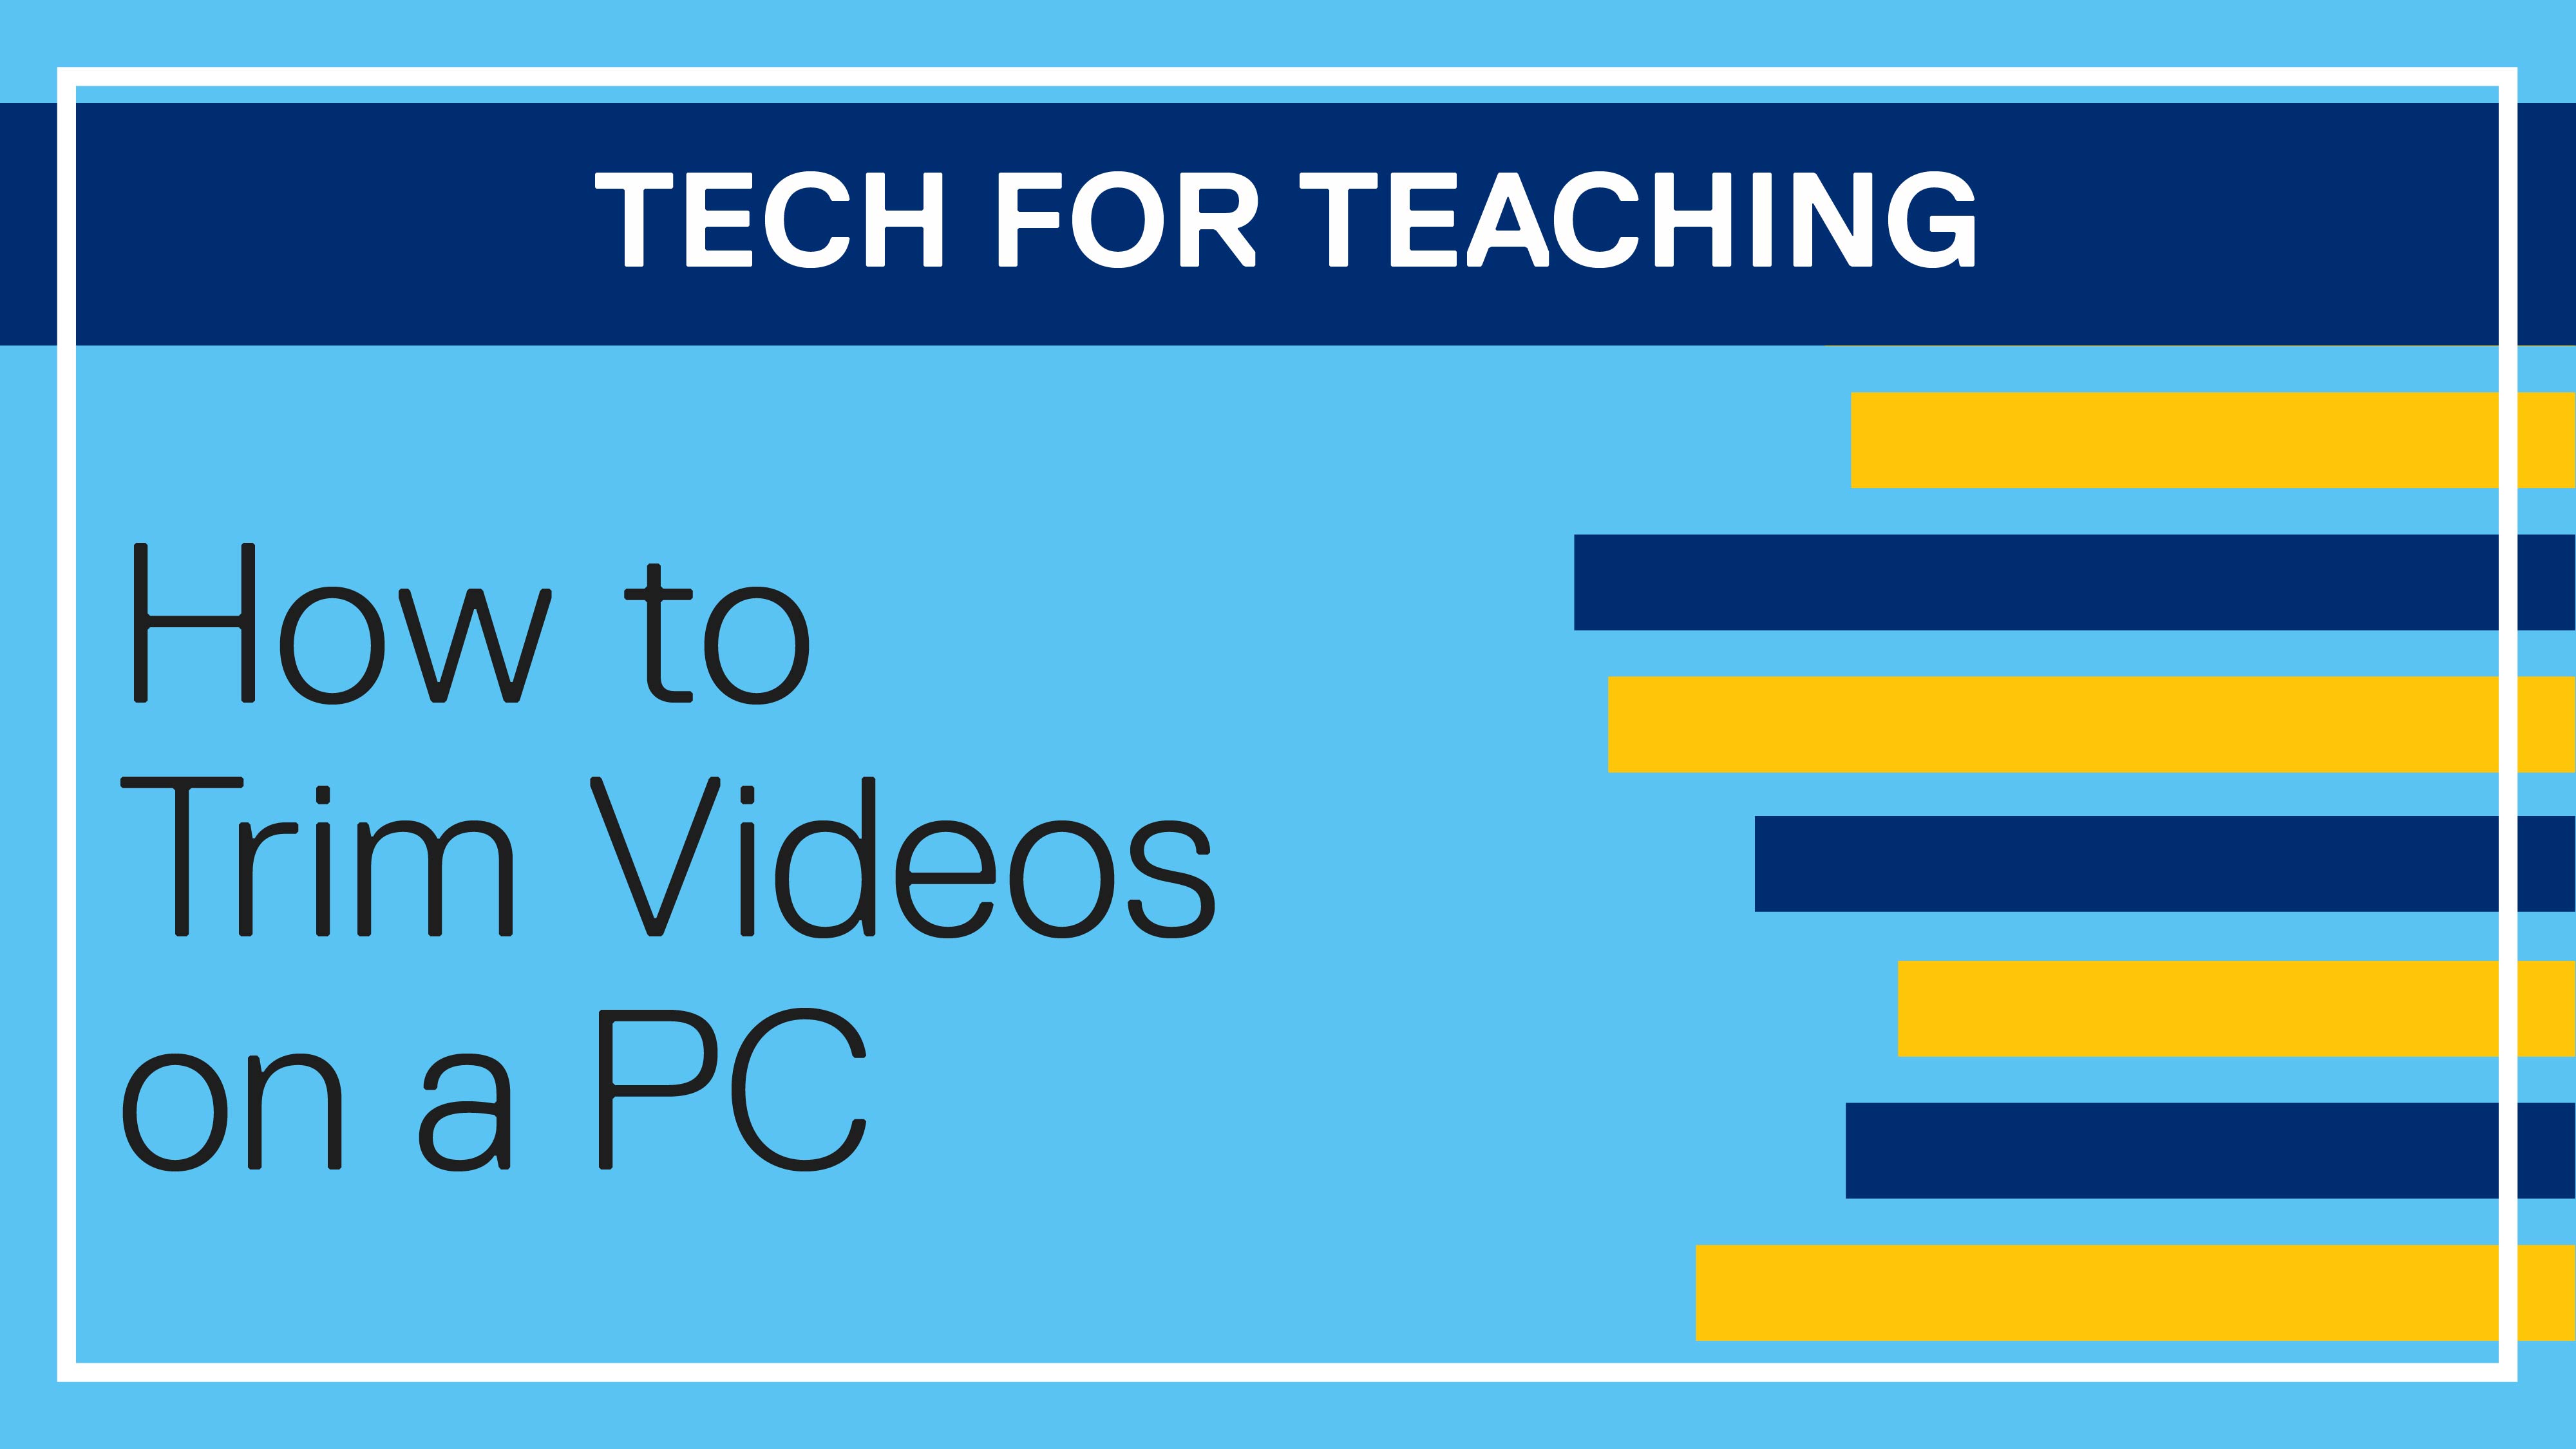 Tech for Teaching: How to Trim Videos on a PC